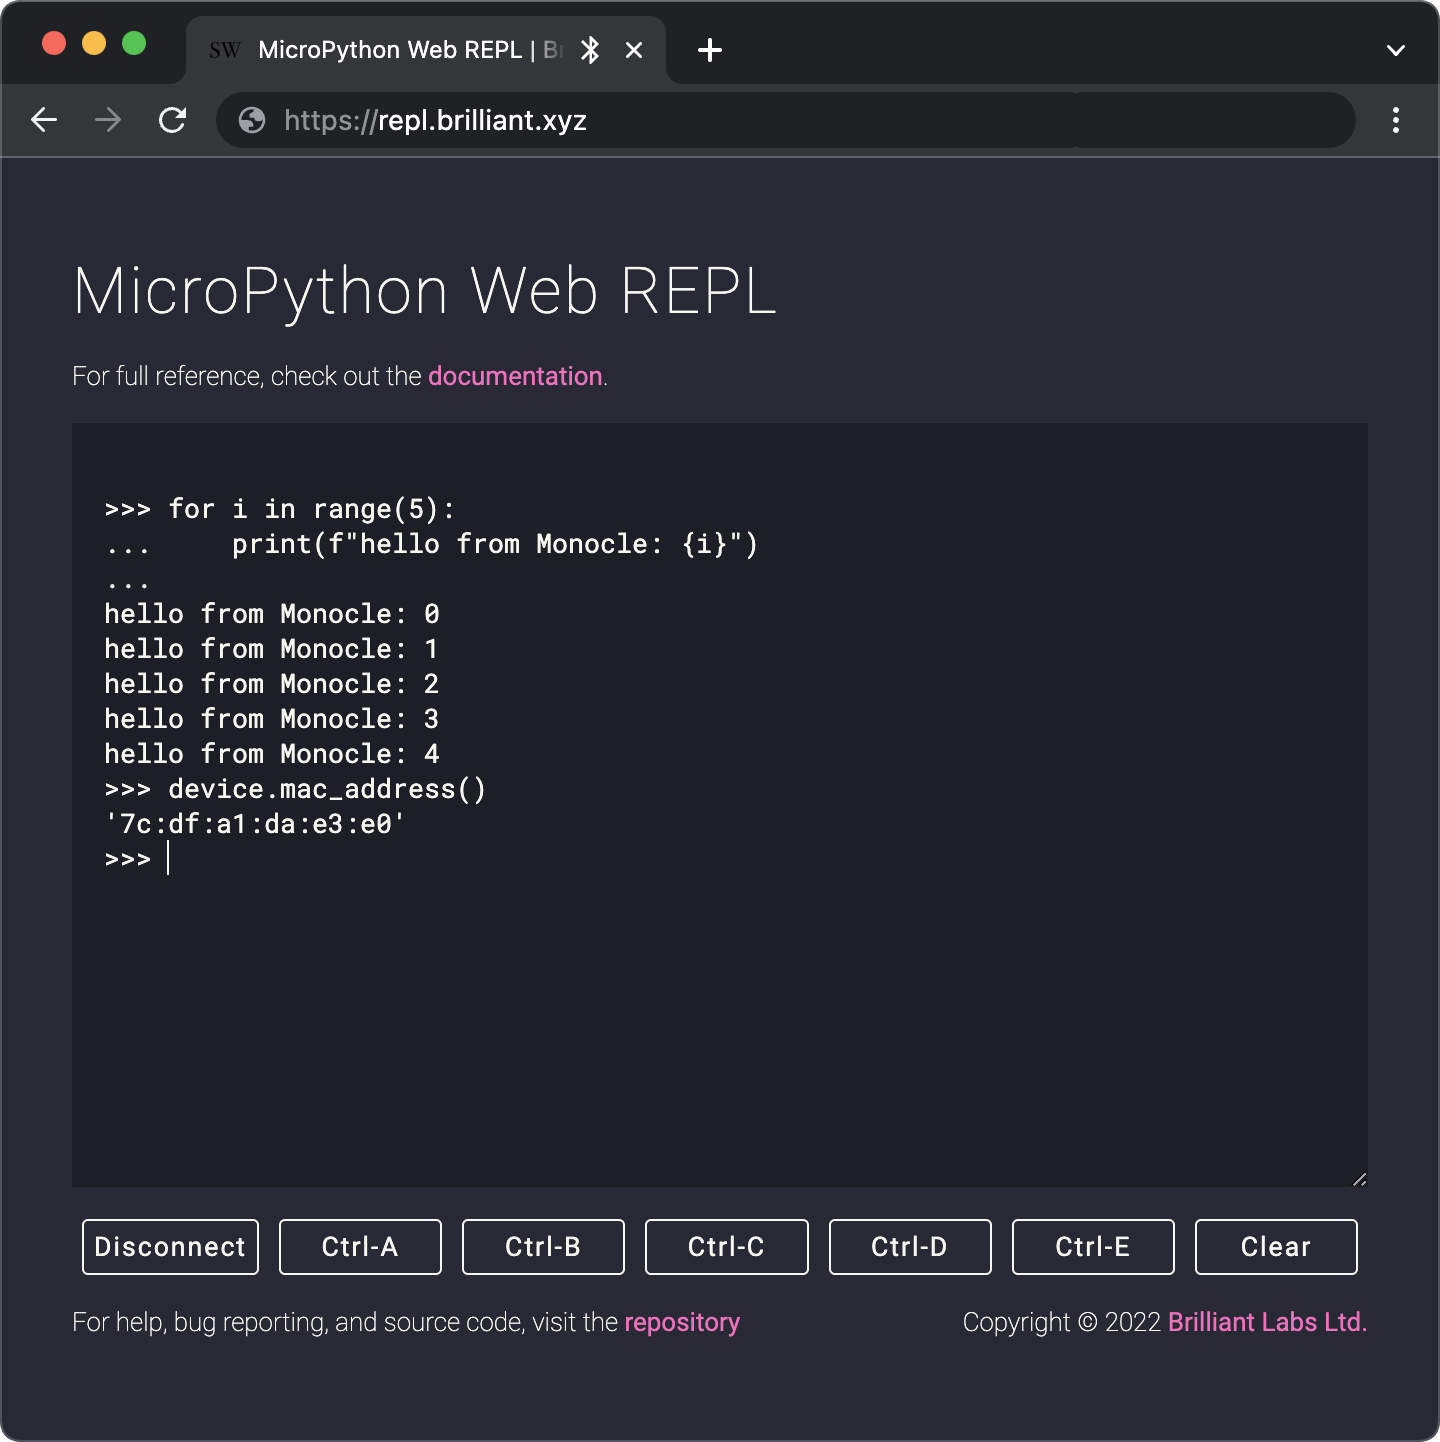 Accessing MicroPython on Monocle using the WebREPL interface